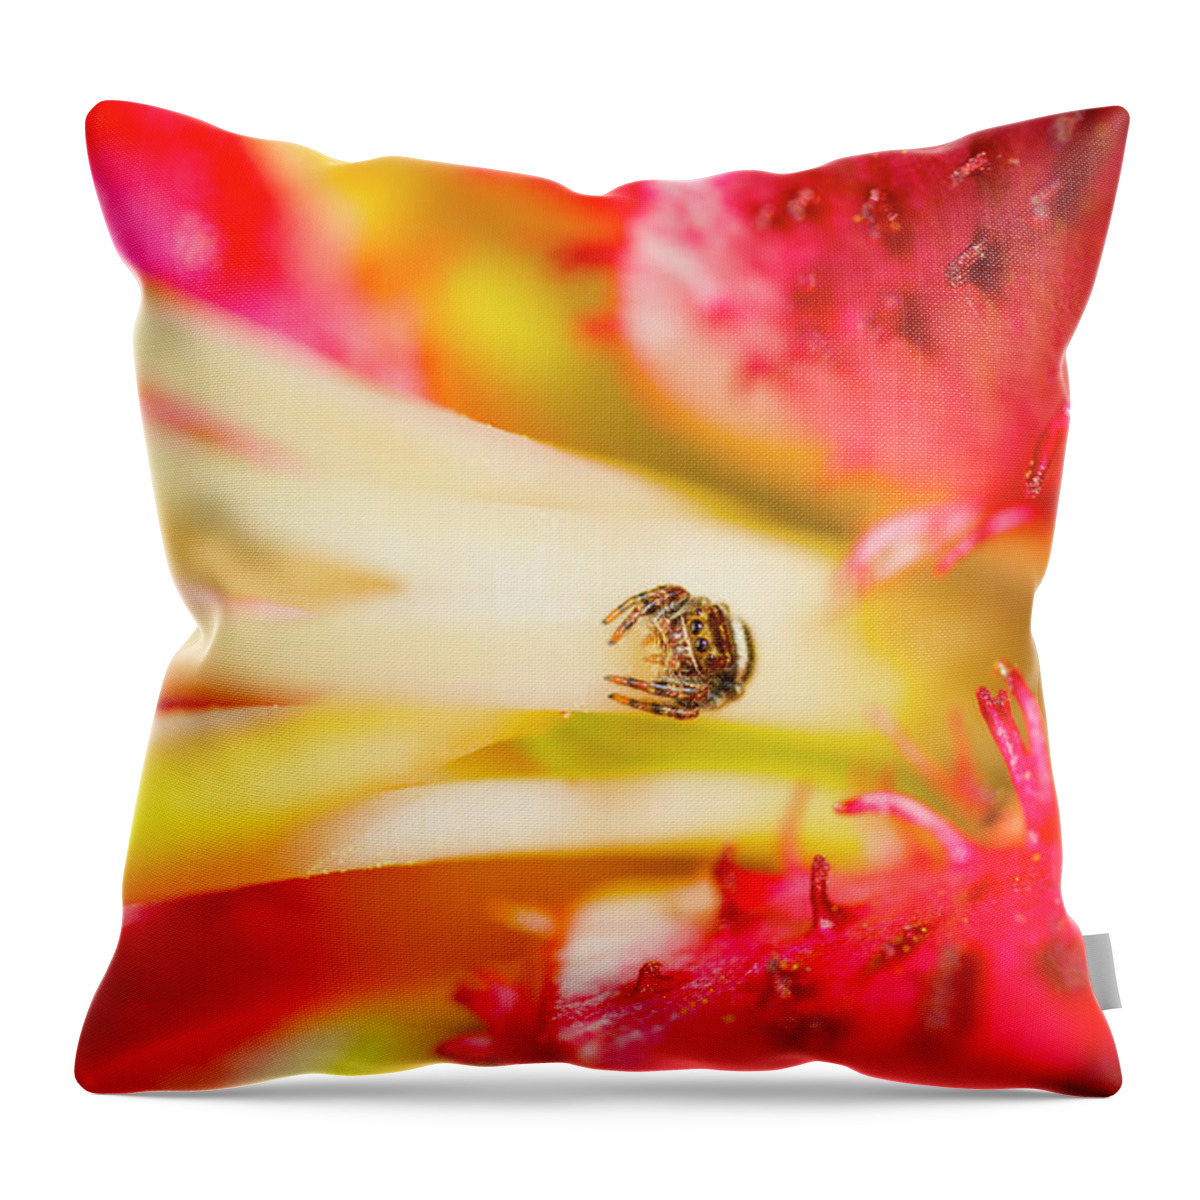 D1-a-8176 Throw Pillow featuring the photograph Watching Me by Paul W Faust - Impressions of Light